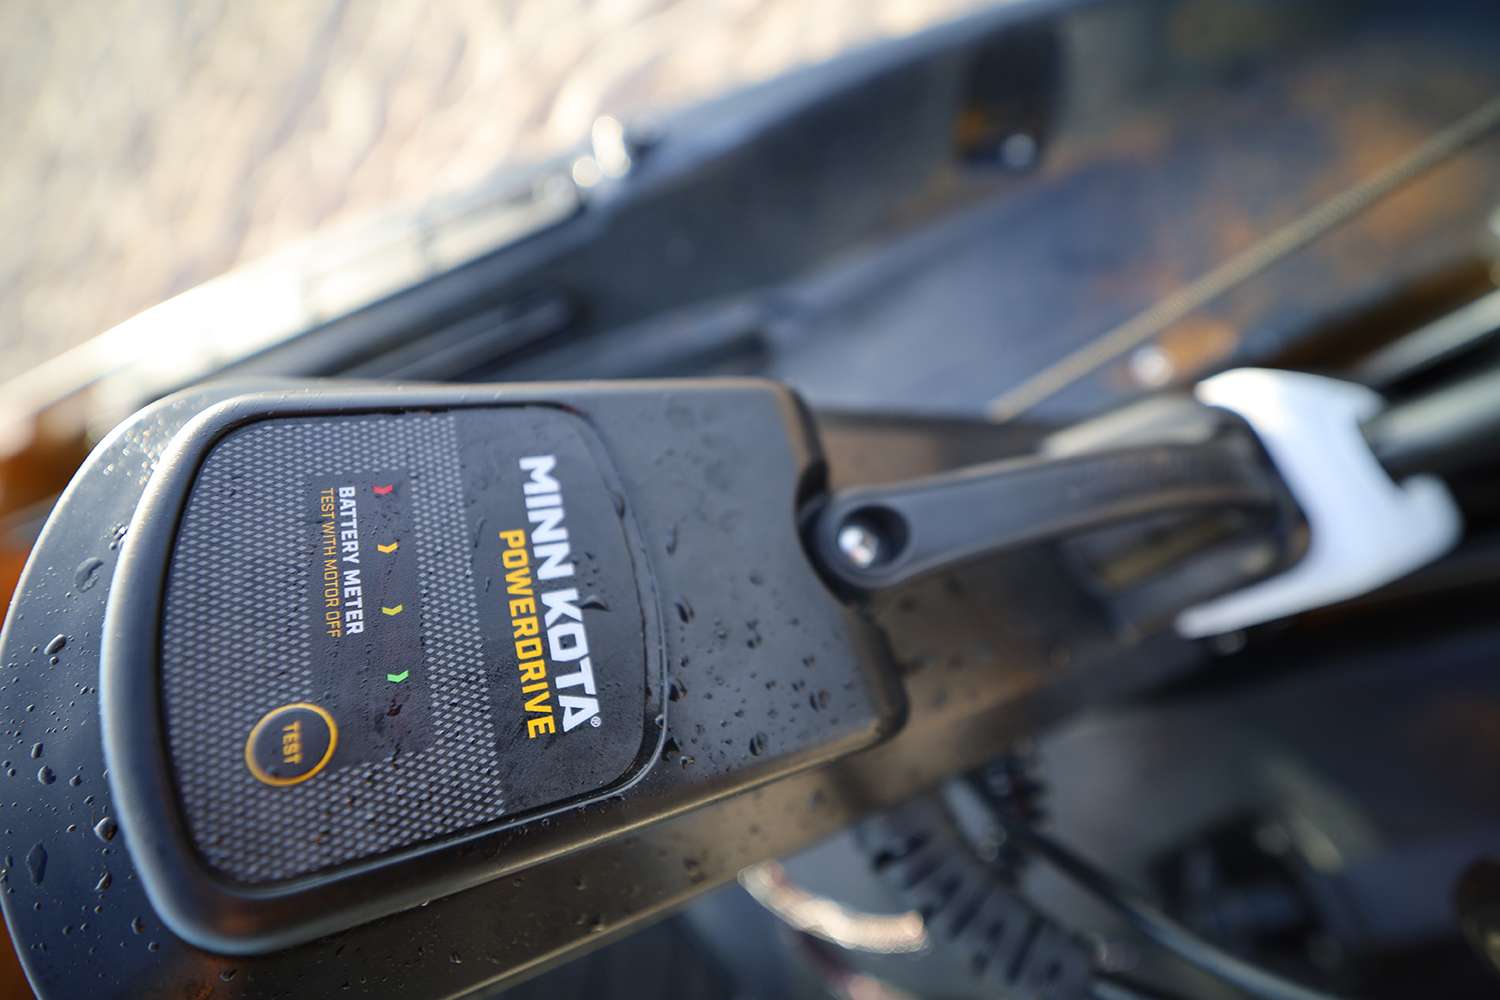 At the base of the trolling motor is a battery meter to keep you informed about how much power you have remaining. 